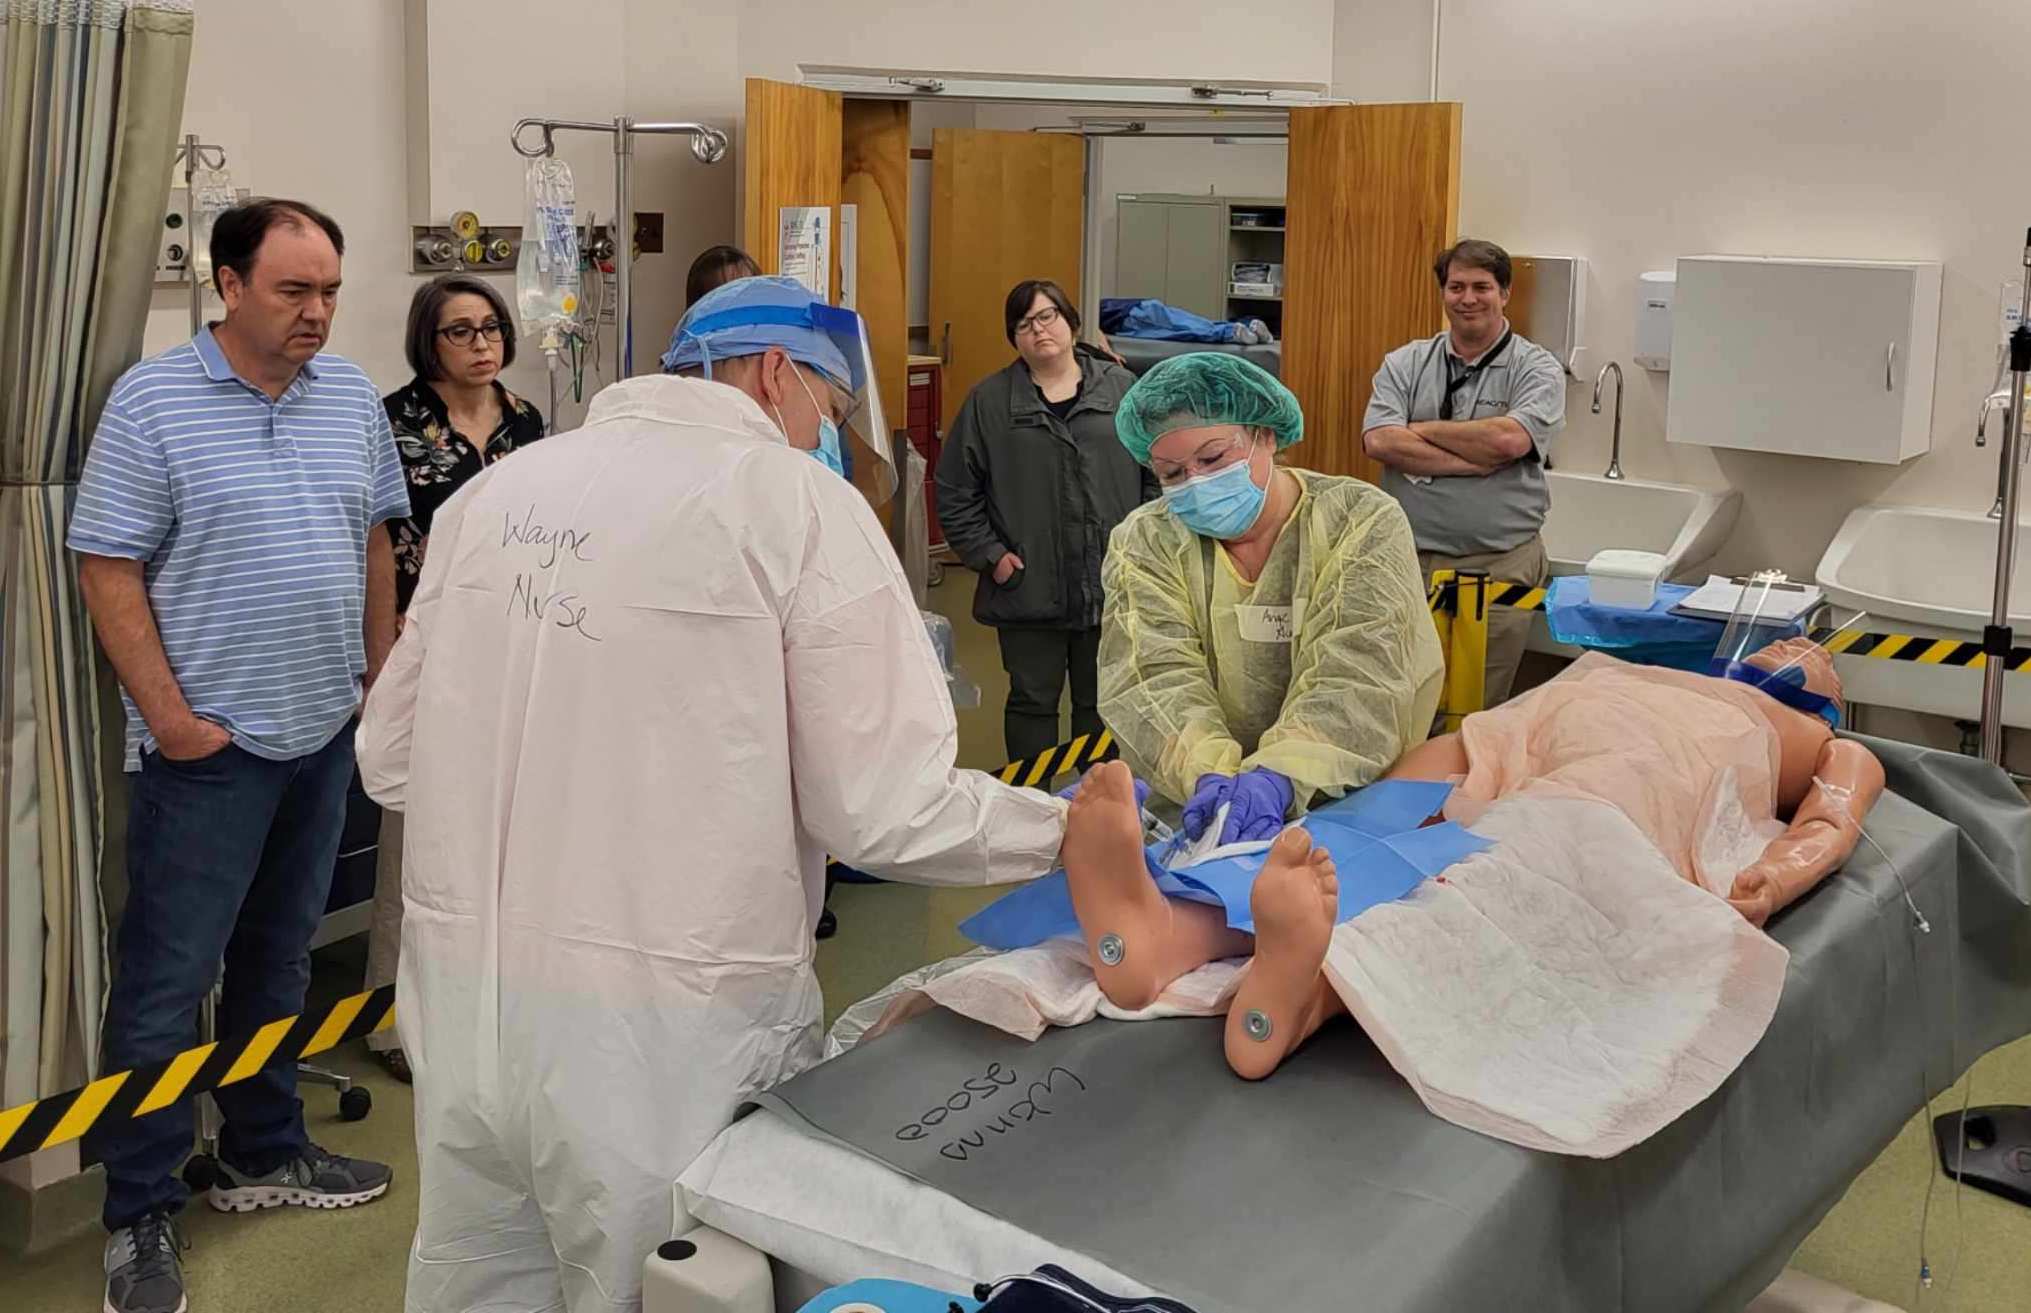 REAC/TS conducted a Radiation Emergency Medicine course at its Oak Ridge facility on April 5-7, 2022